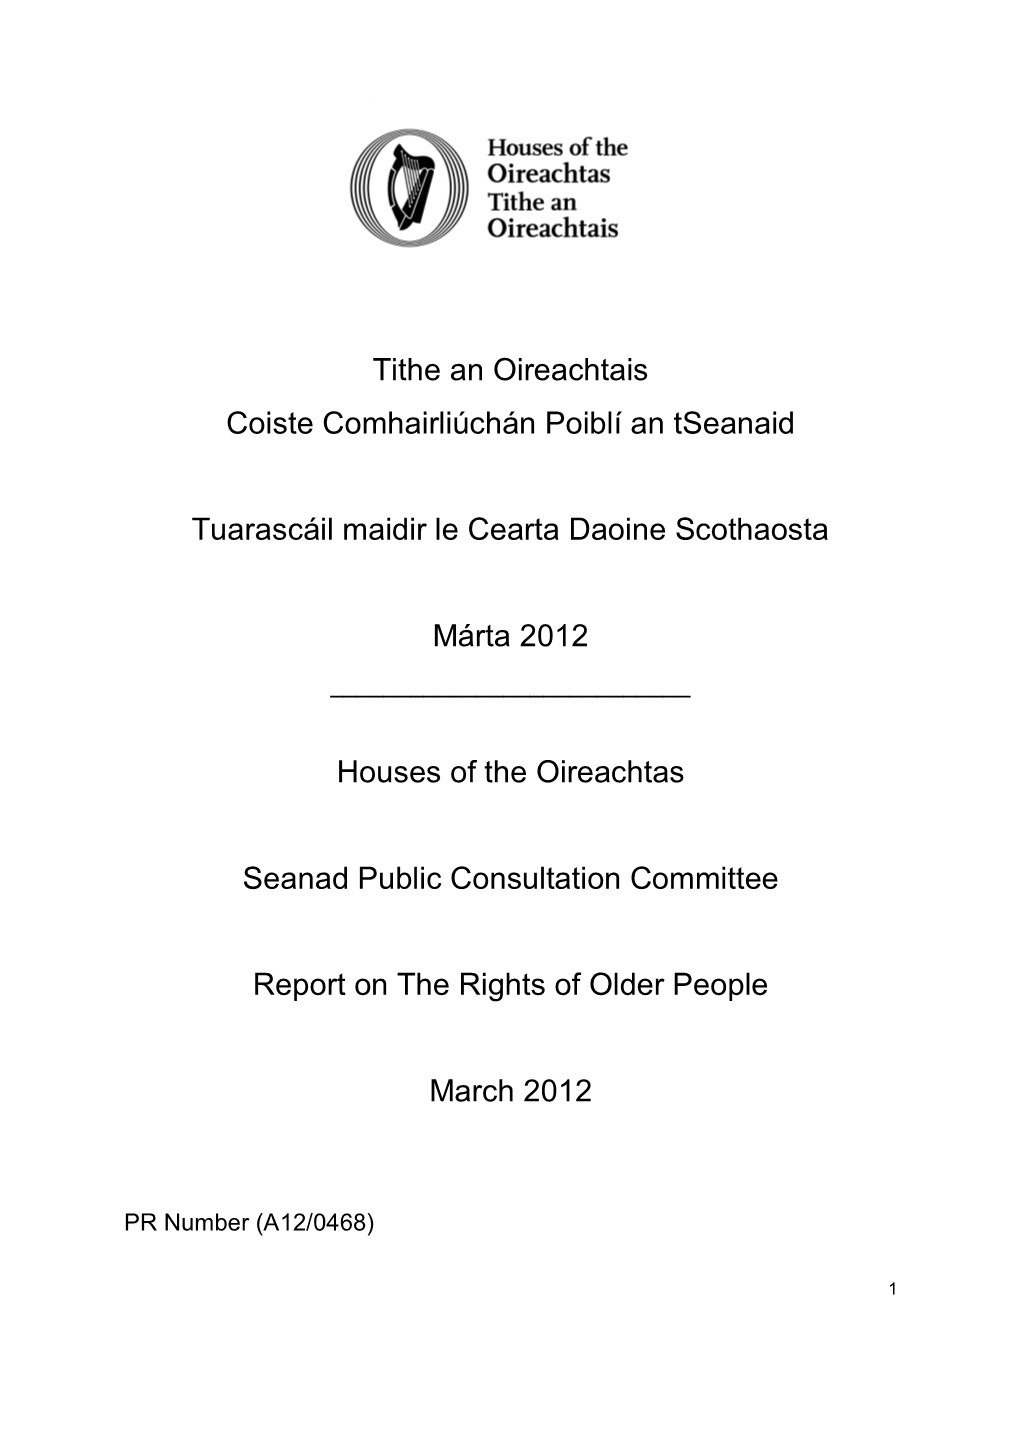 Report on the Rights of Older People